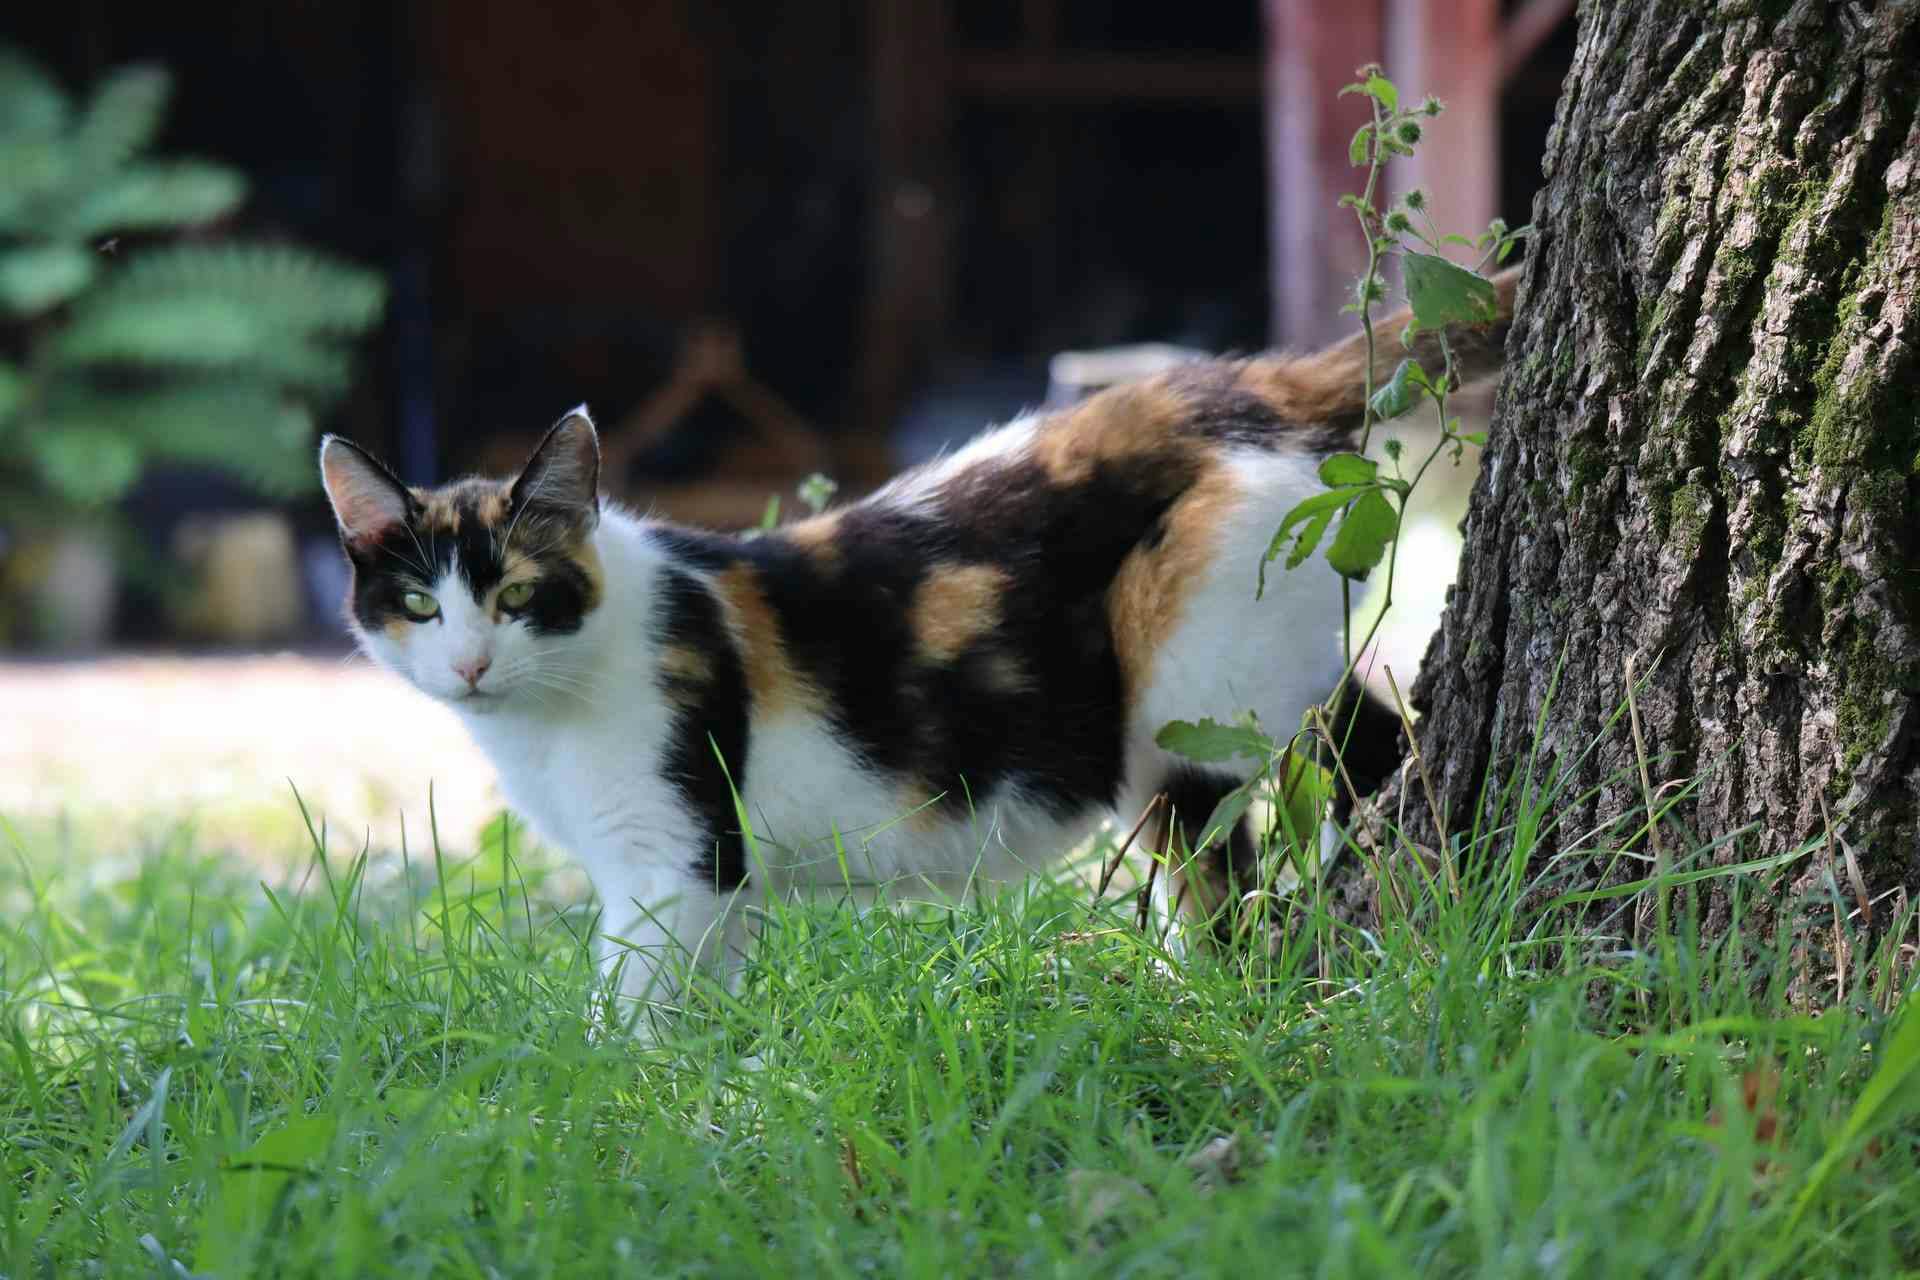 Calico cat looking mean.